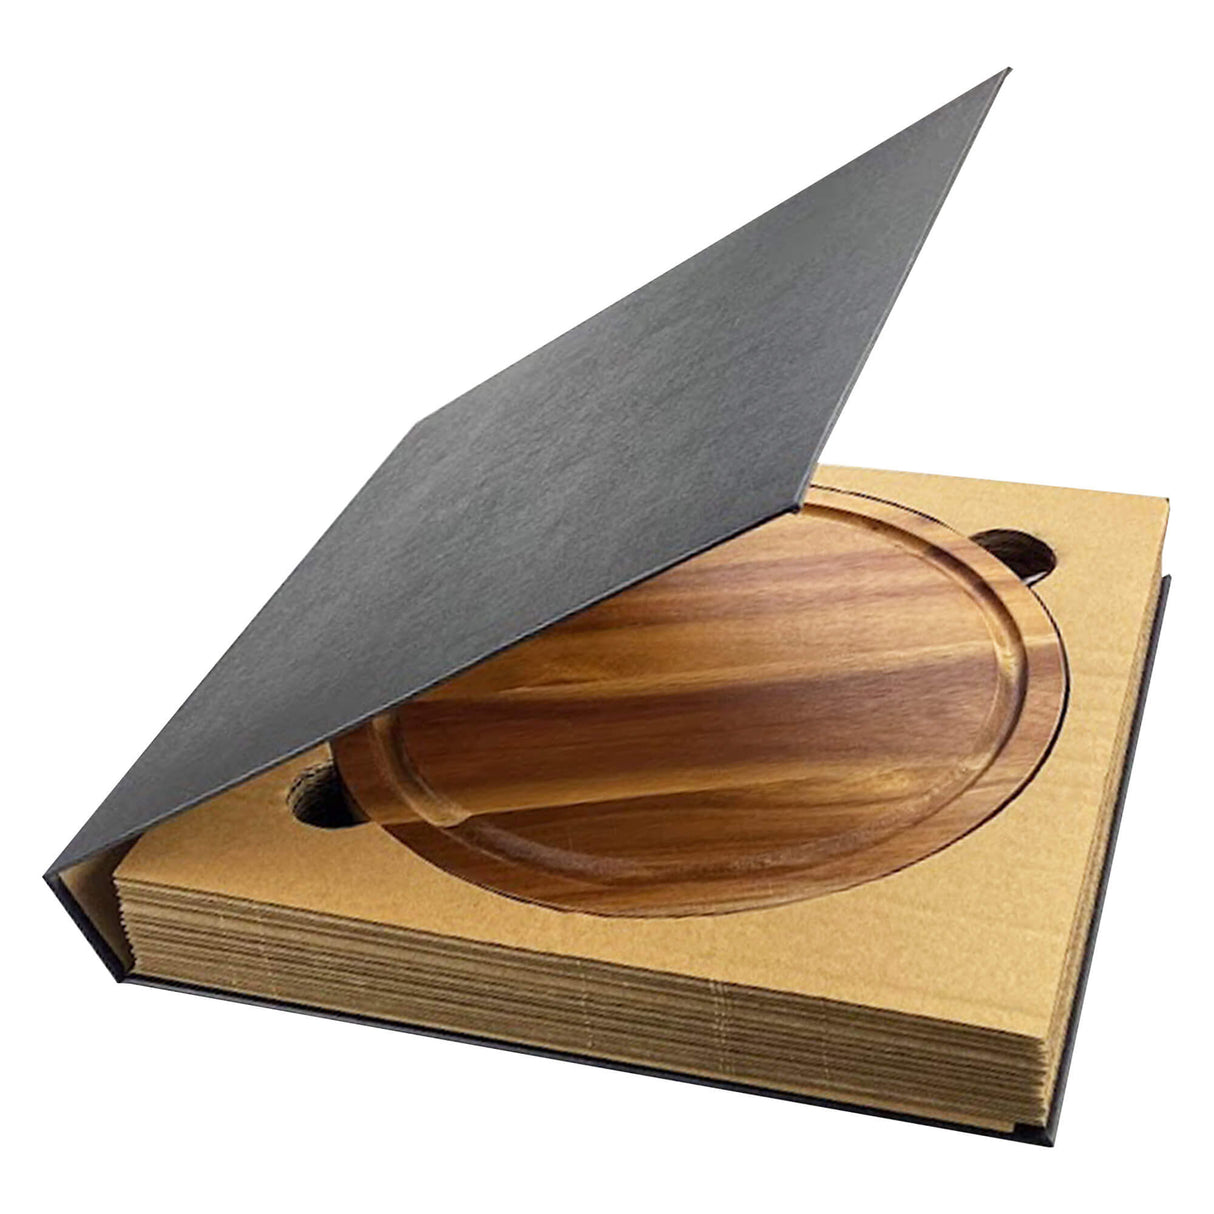 Exquisite Cheeseboard & Knife Set - Engraved